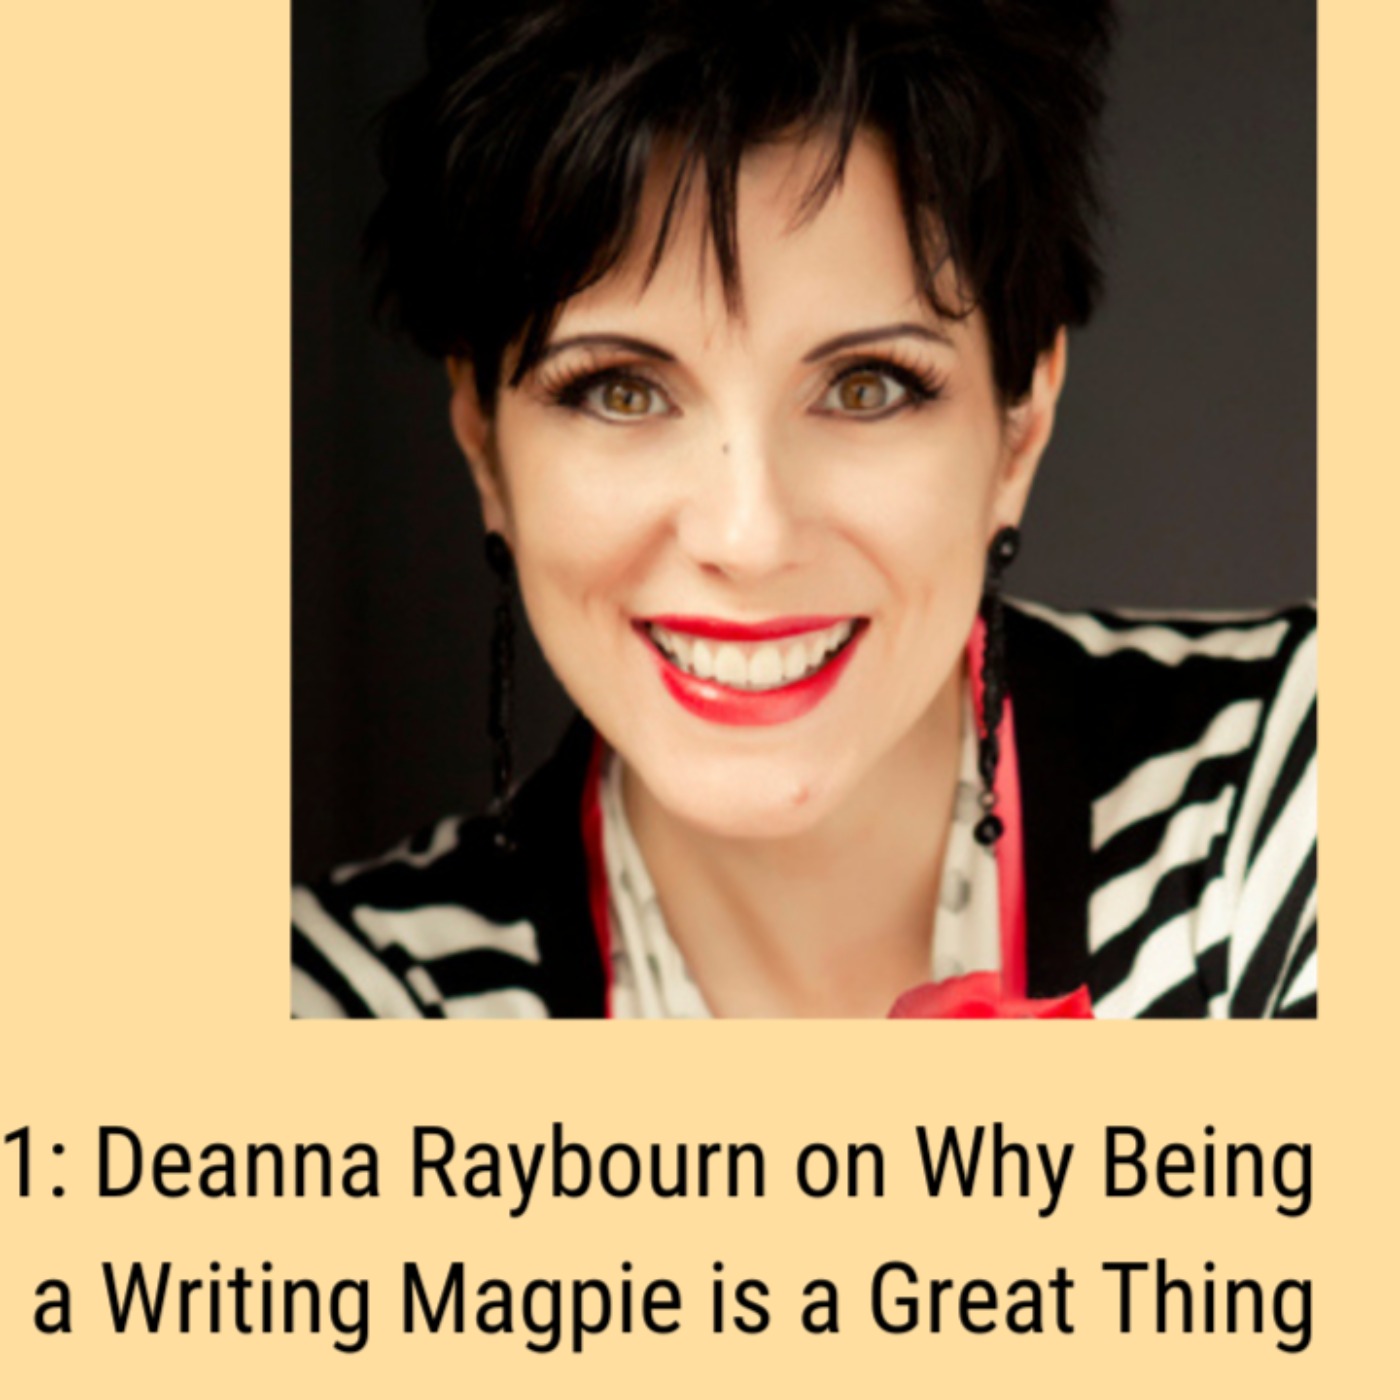 Ep. 231: Deanna Raybourn on Why Being a Writing Magpie is a Great Thing